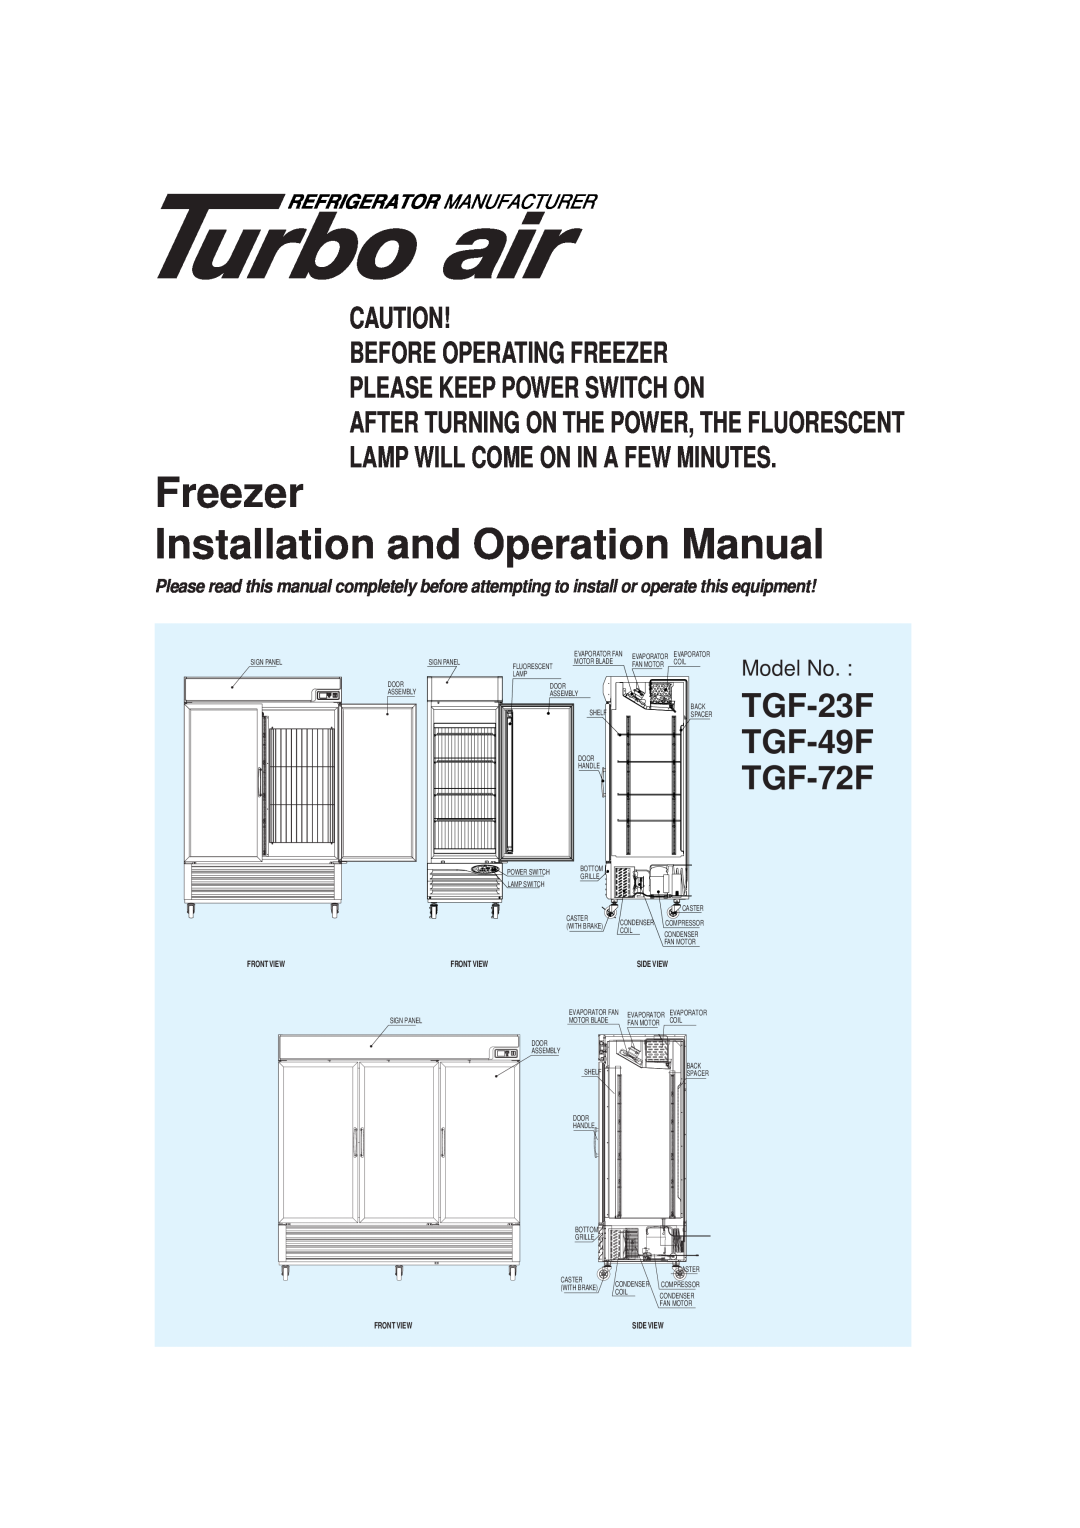 Turbo Air operation manual TGF-23F TGF-49F TGF-72F, Before Operating Freezer, Please Keep Power Switch On, Front View 